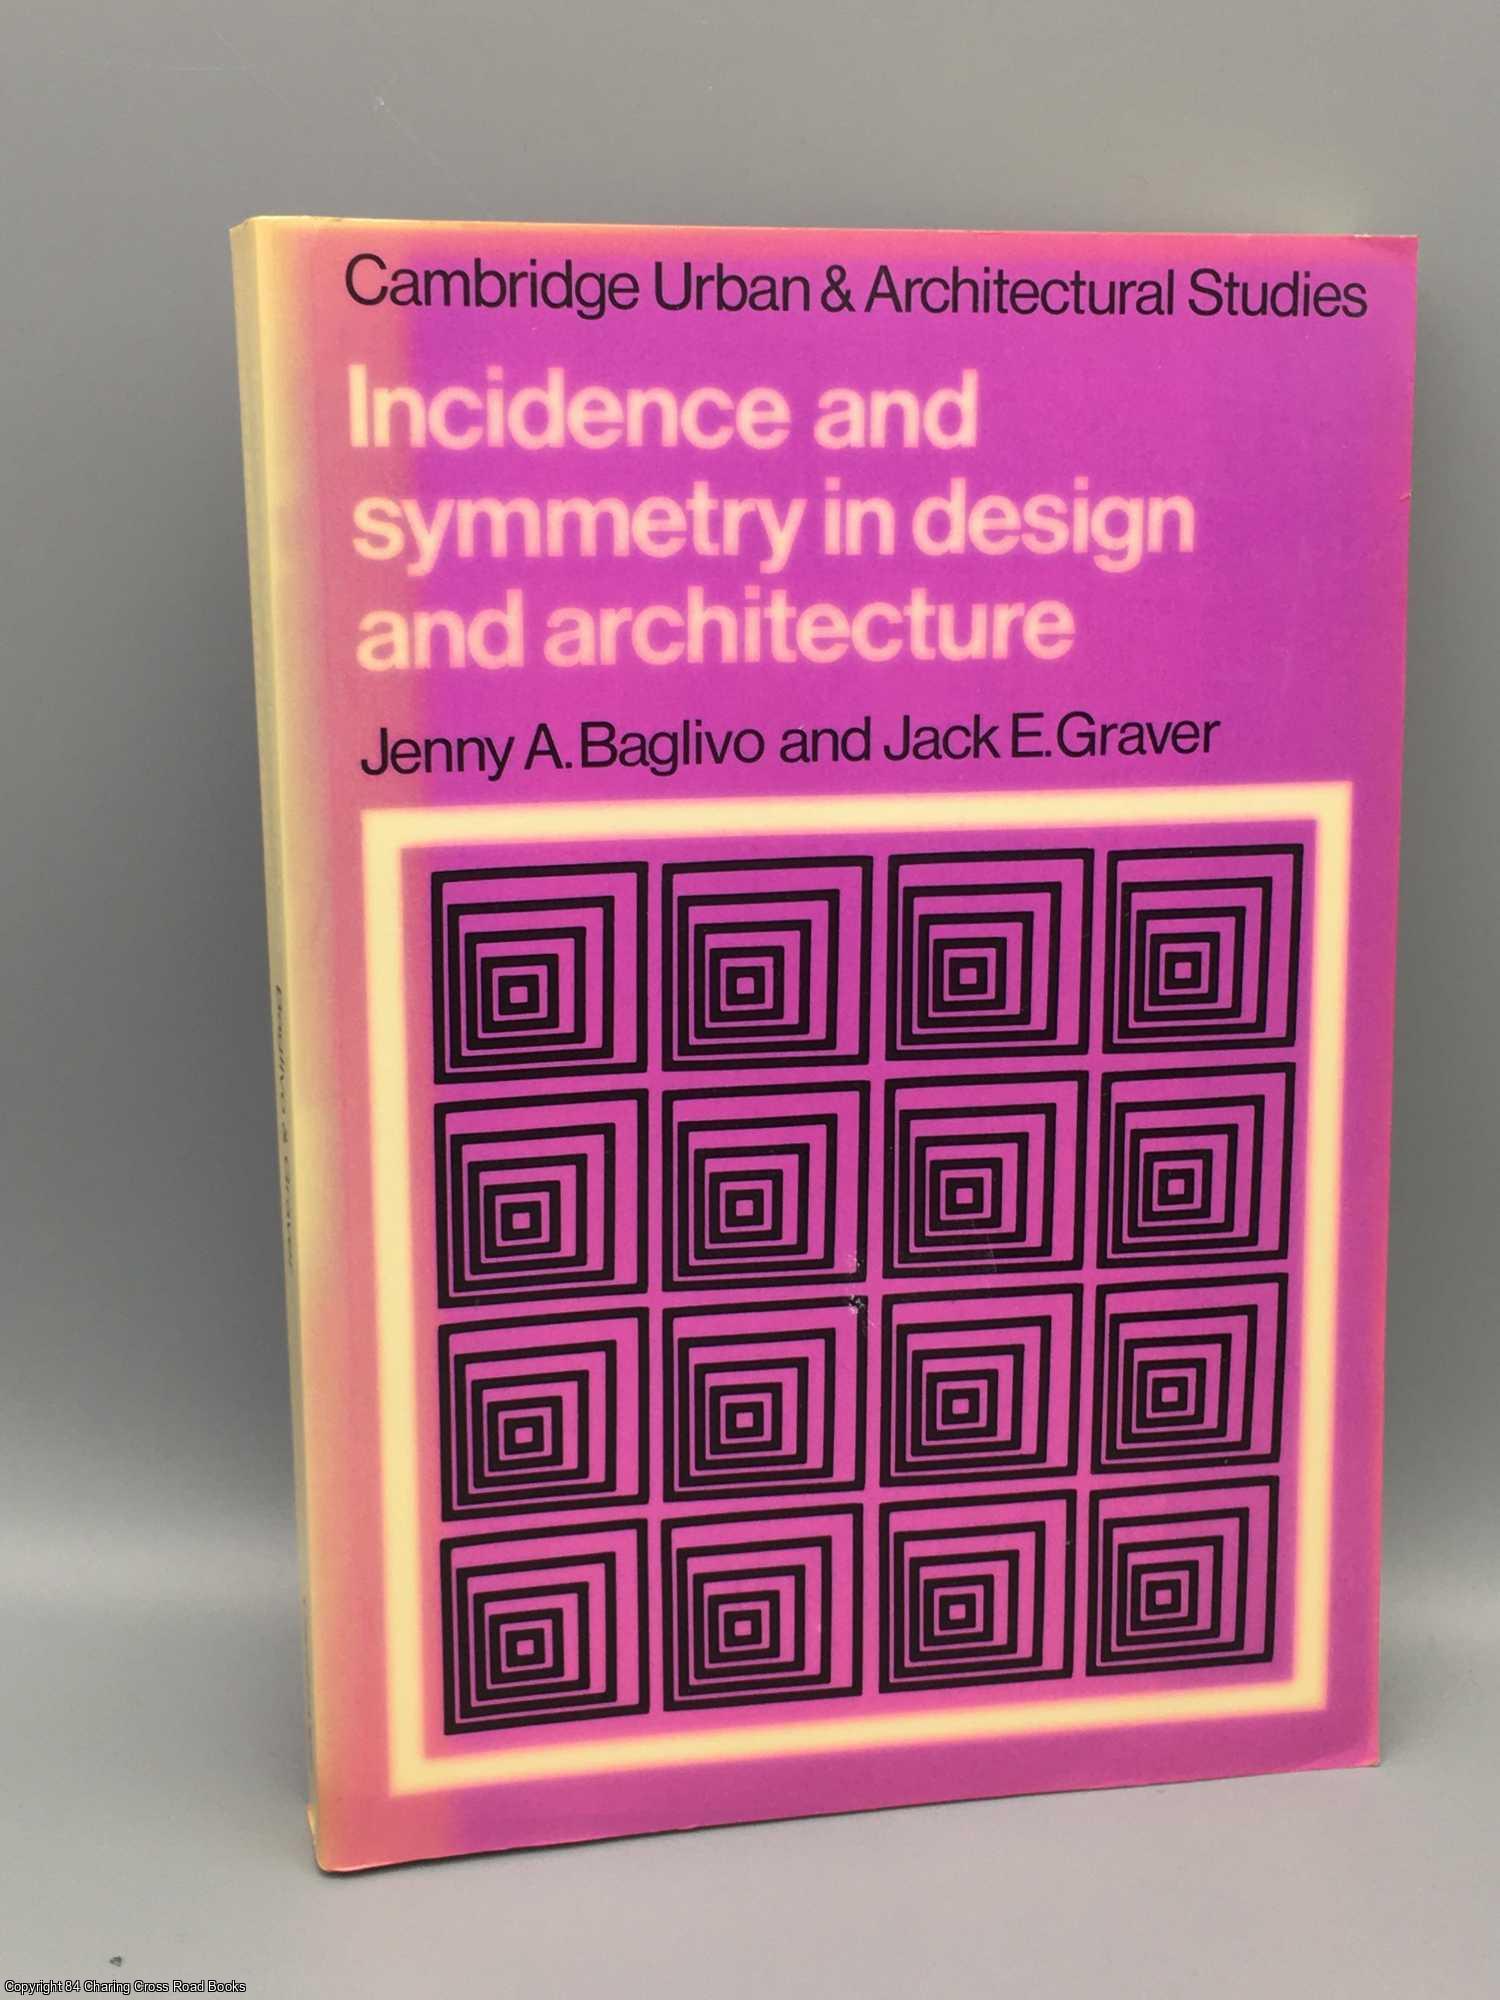 Bagliro, Jenny A - Incidence and symmetry in design and architecture